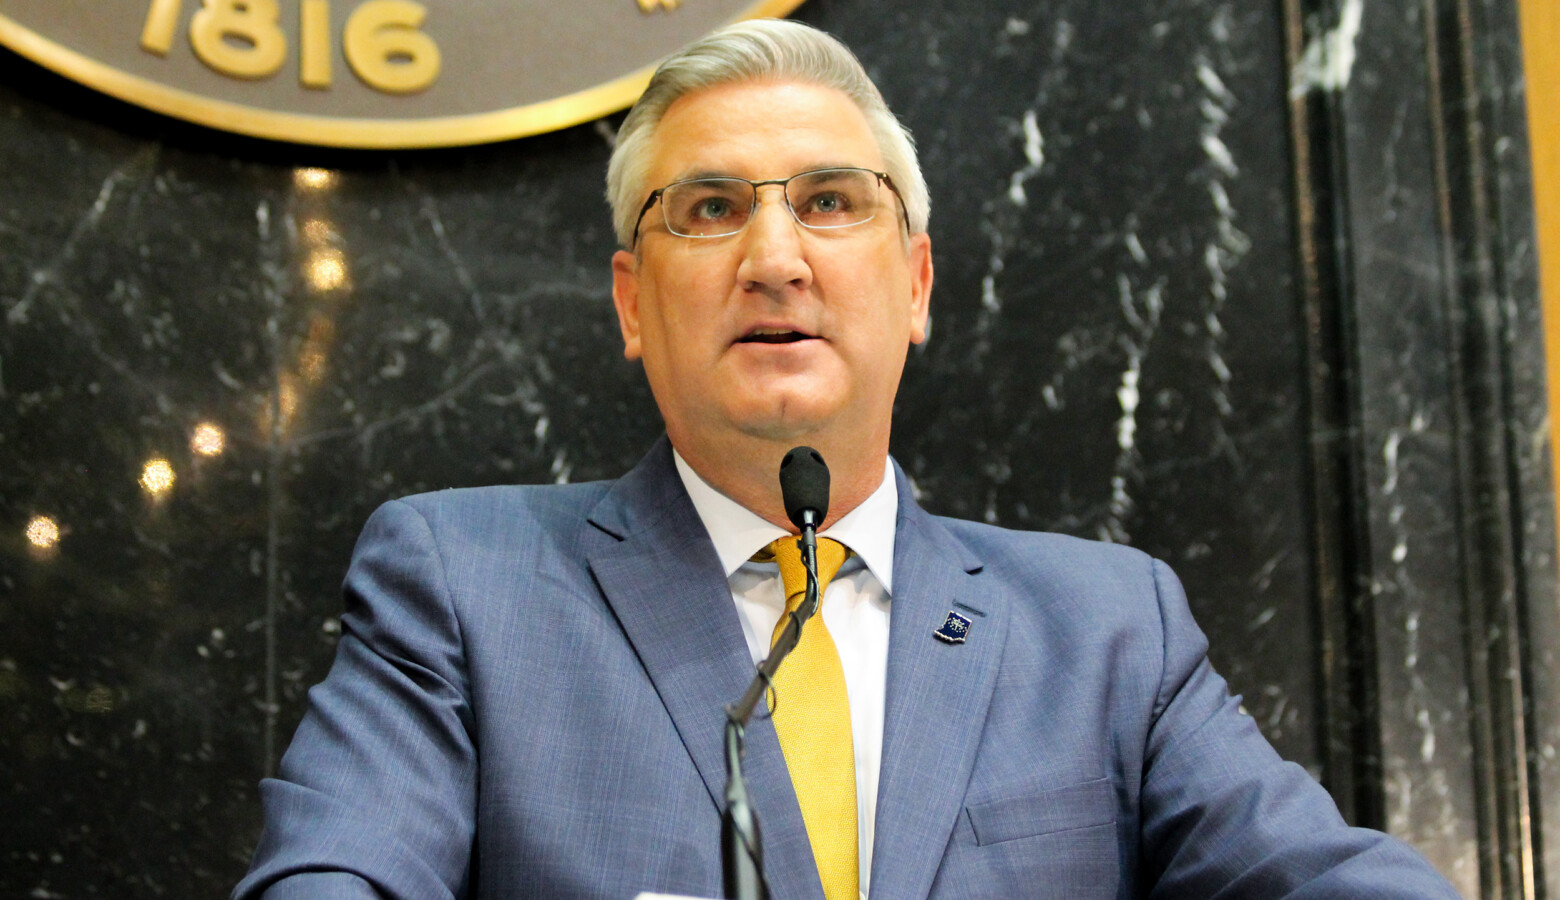 Gov. Eric Holcomb speaks at his third State of the State address. He's expected to speak Monday on the latest developments in slowing the spread of COVID-19. (Lauren Chapman/IPB News)